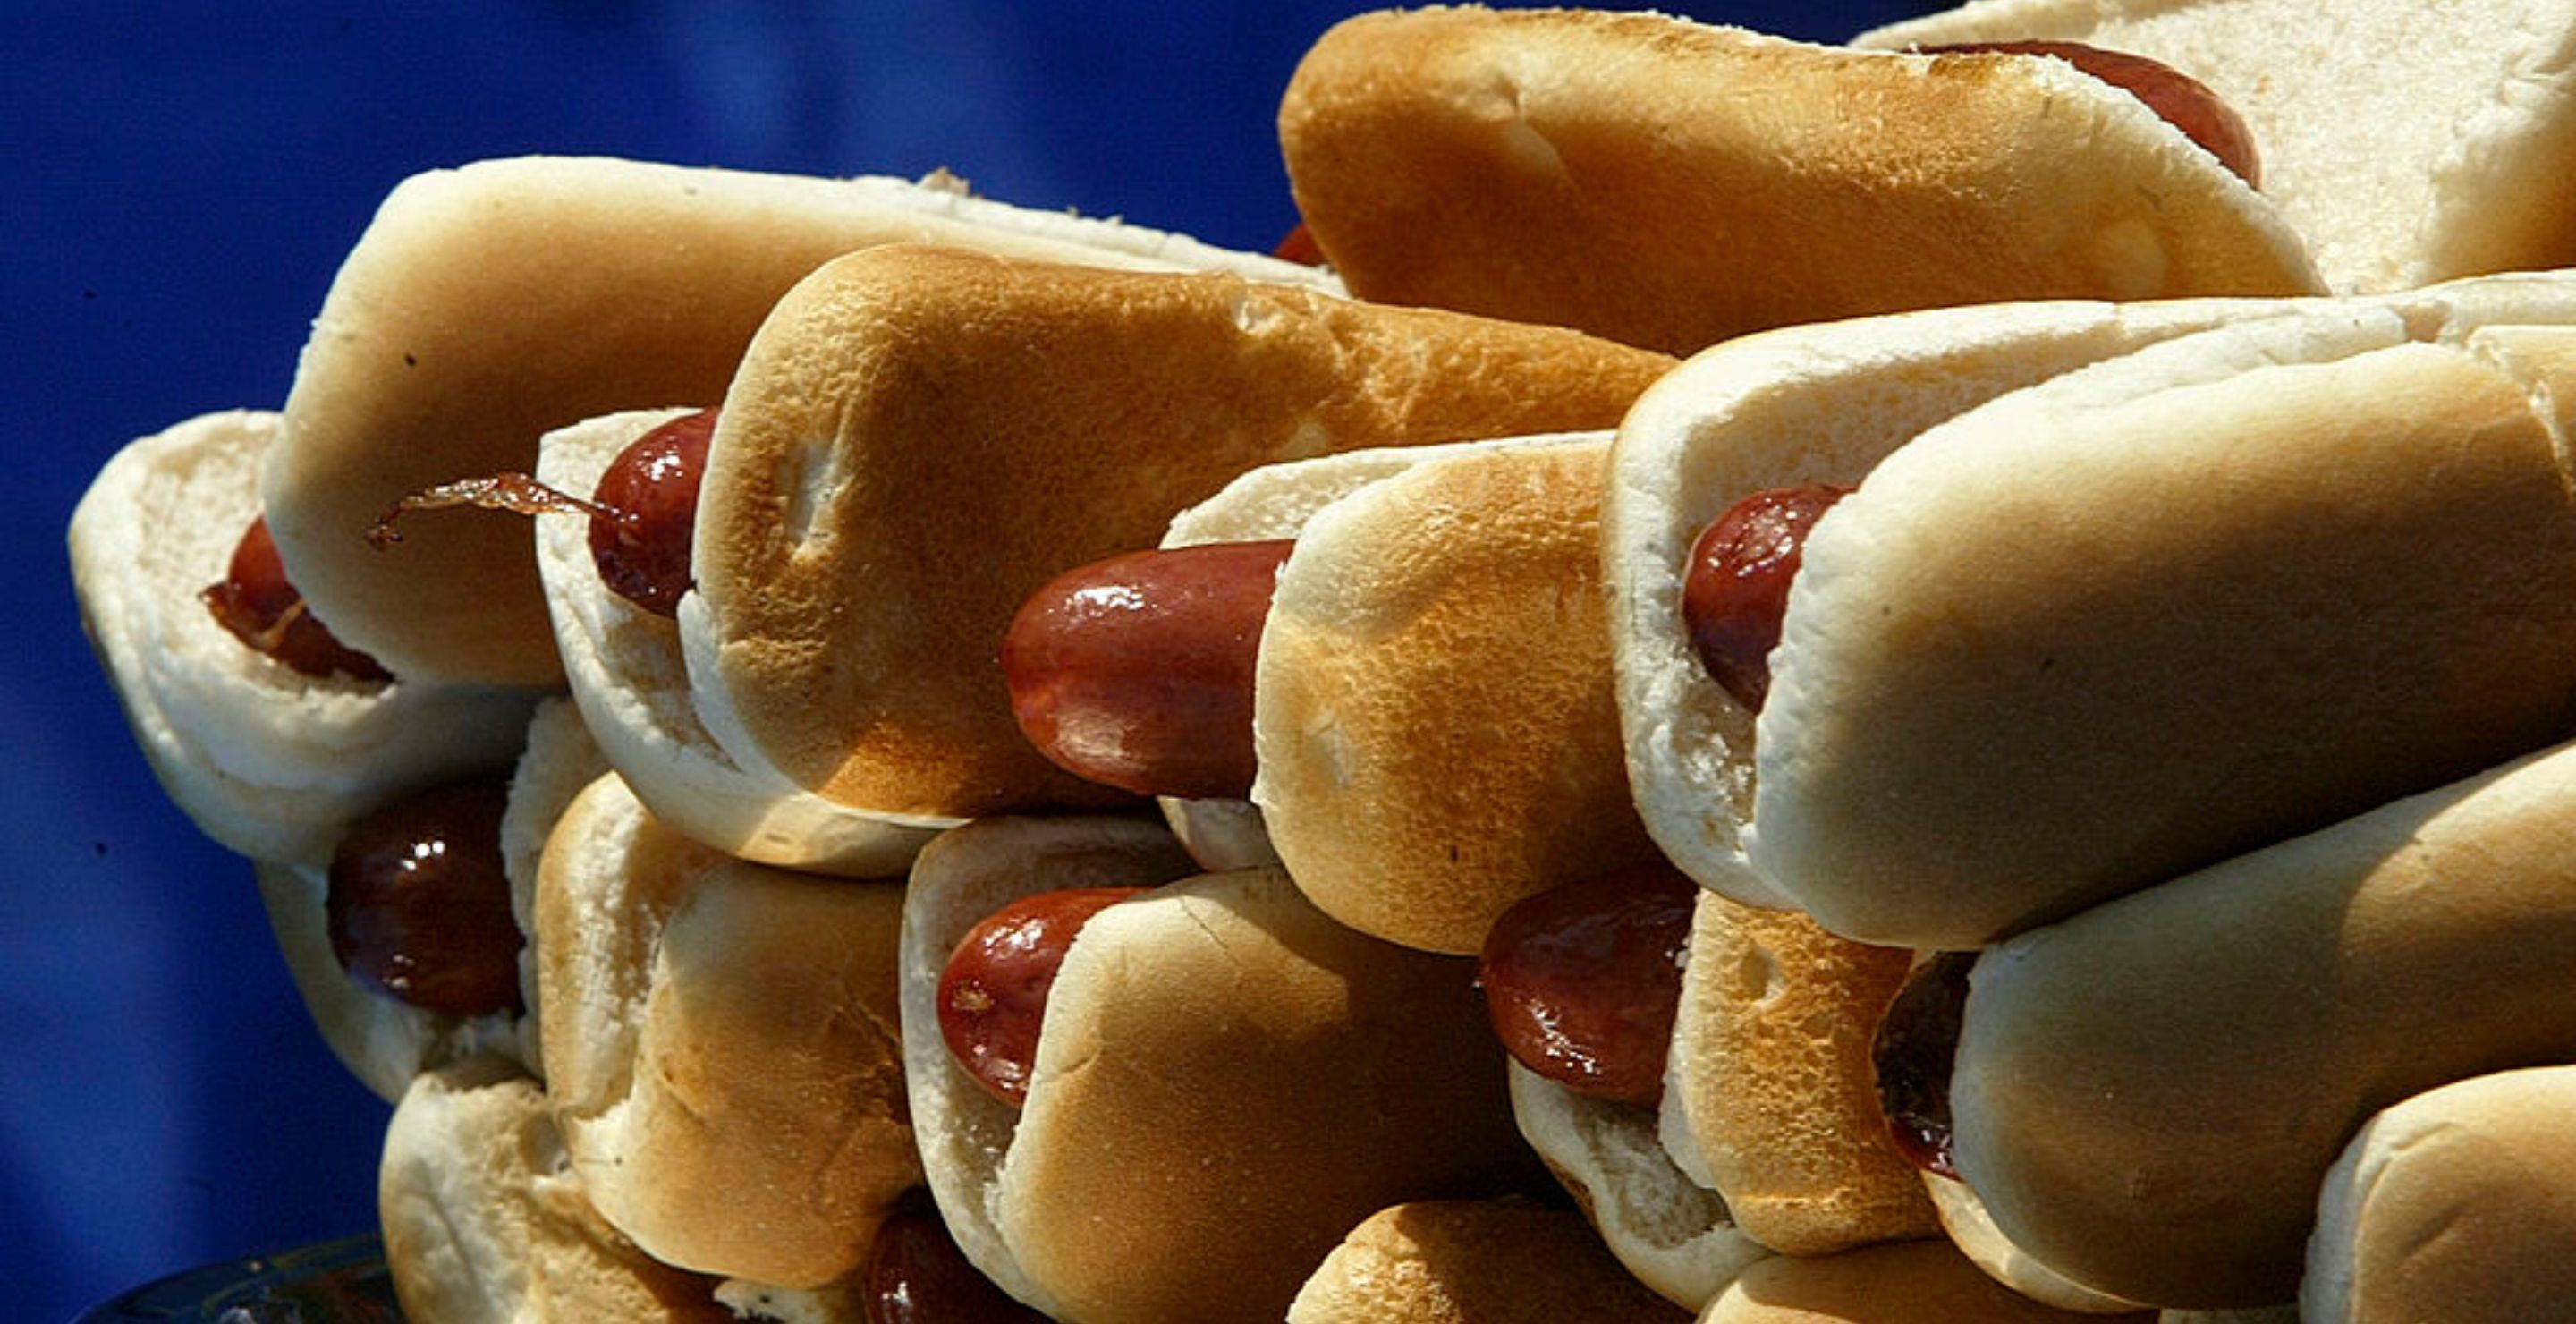 Mass Recall For Thousands Of Pounds Of Hot Dogs